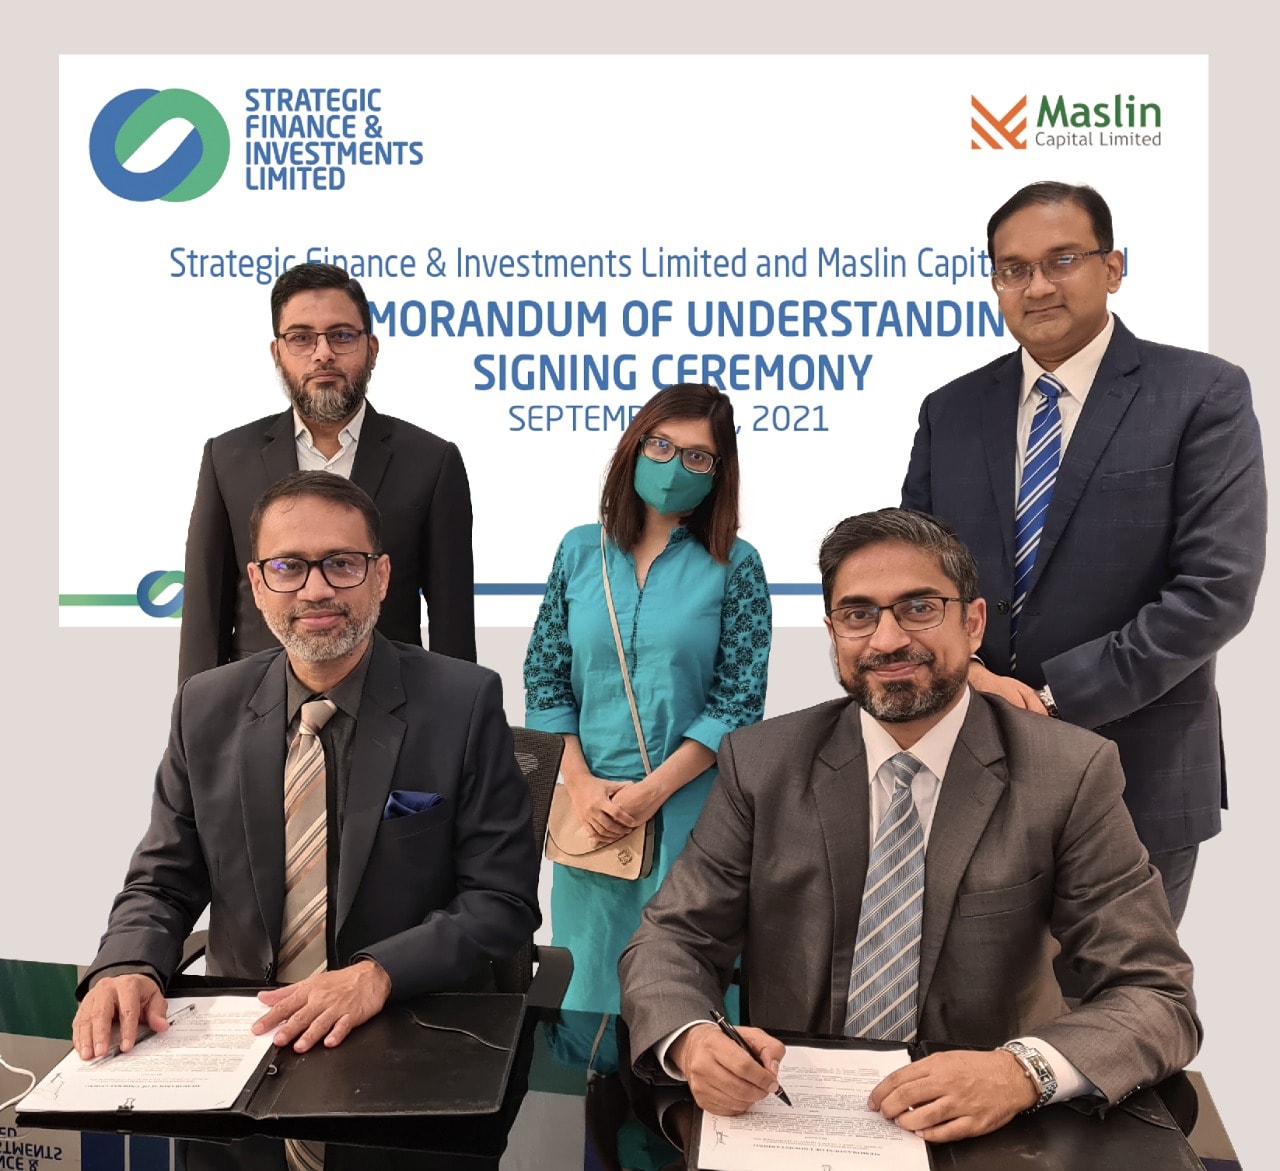 Strategic Finance & Investments Limited and Maslin Capital Limited sign MoU